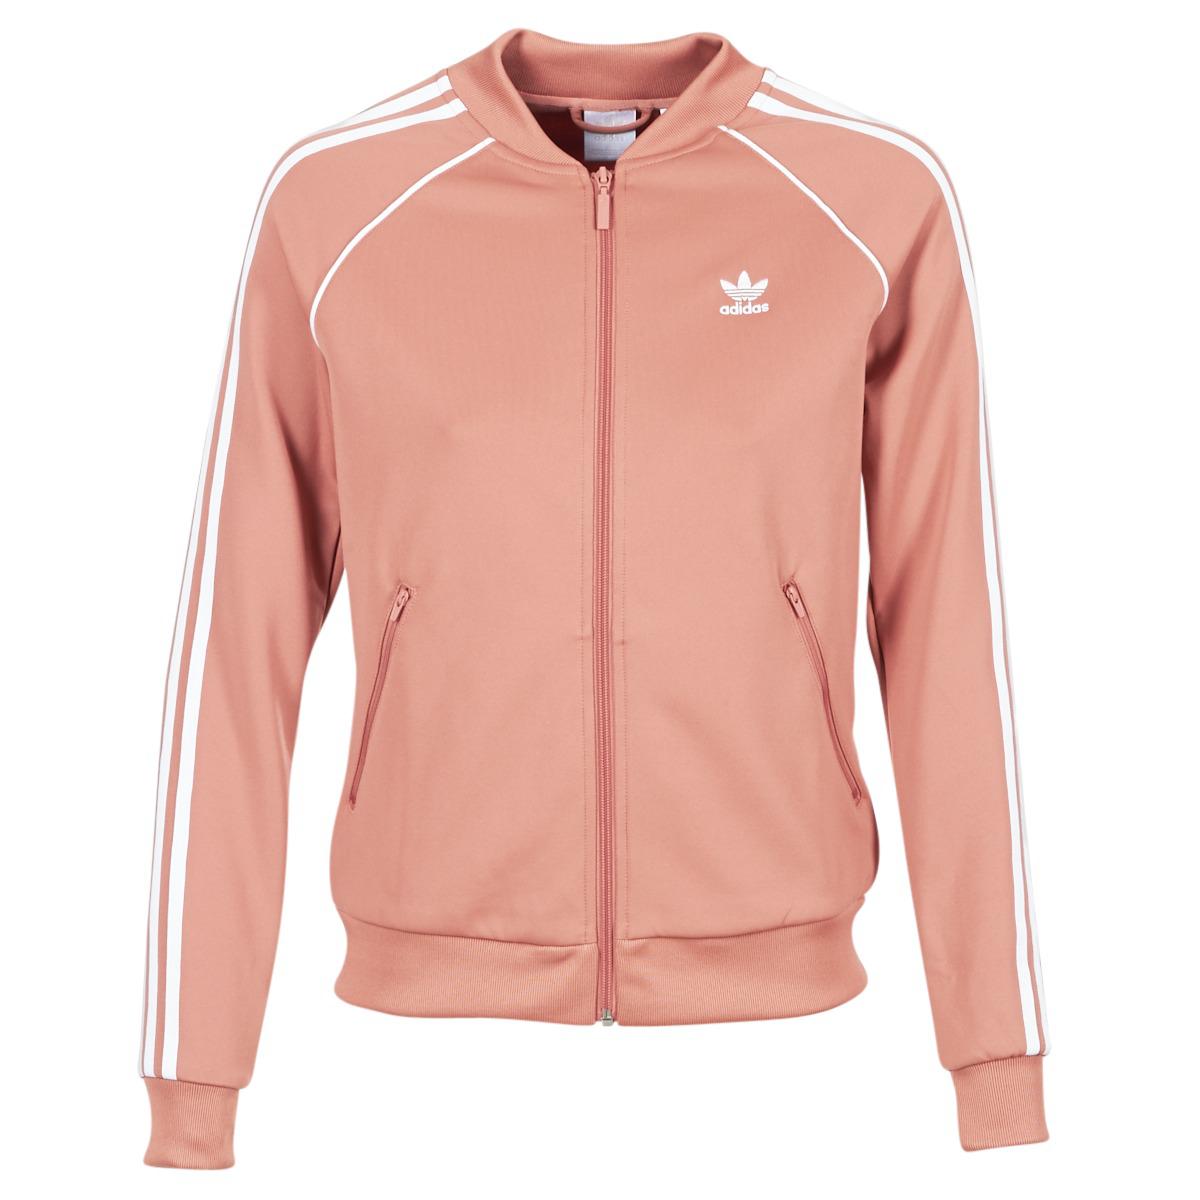 adidas Sst Jacket in Ash Pink (Pink) - Lyst